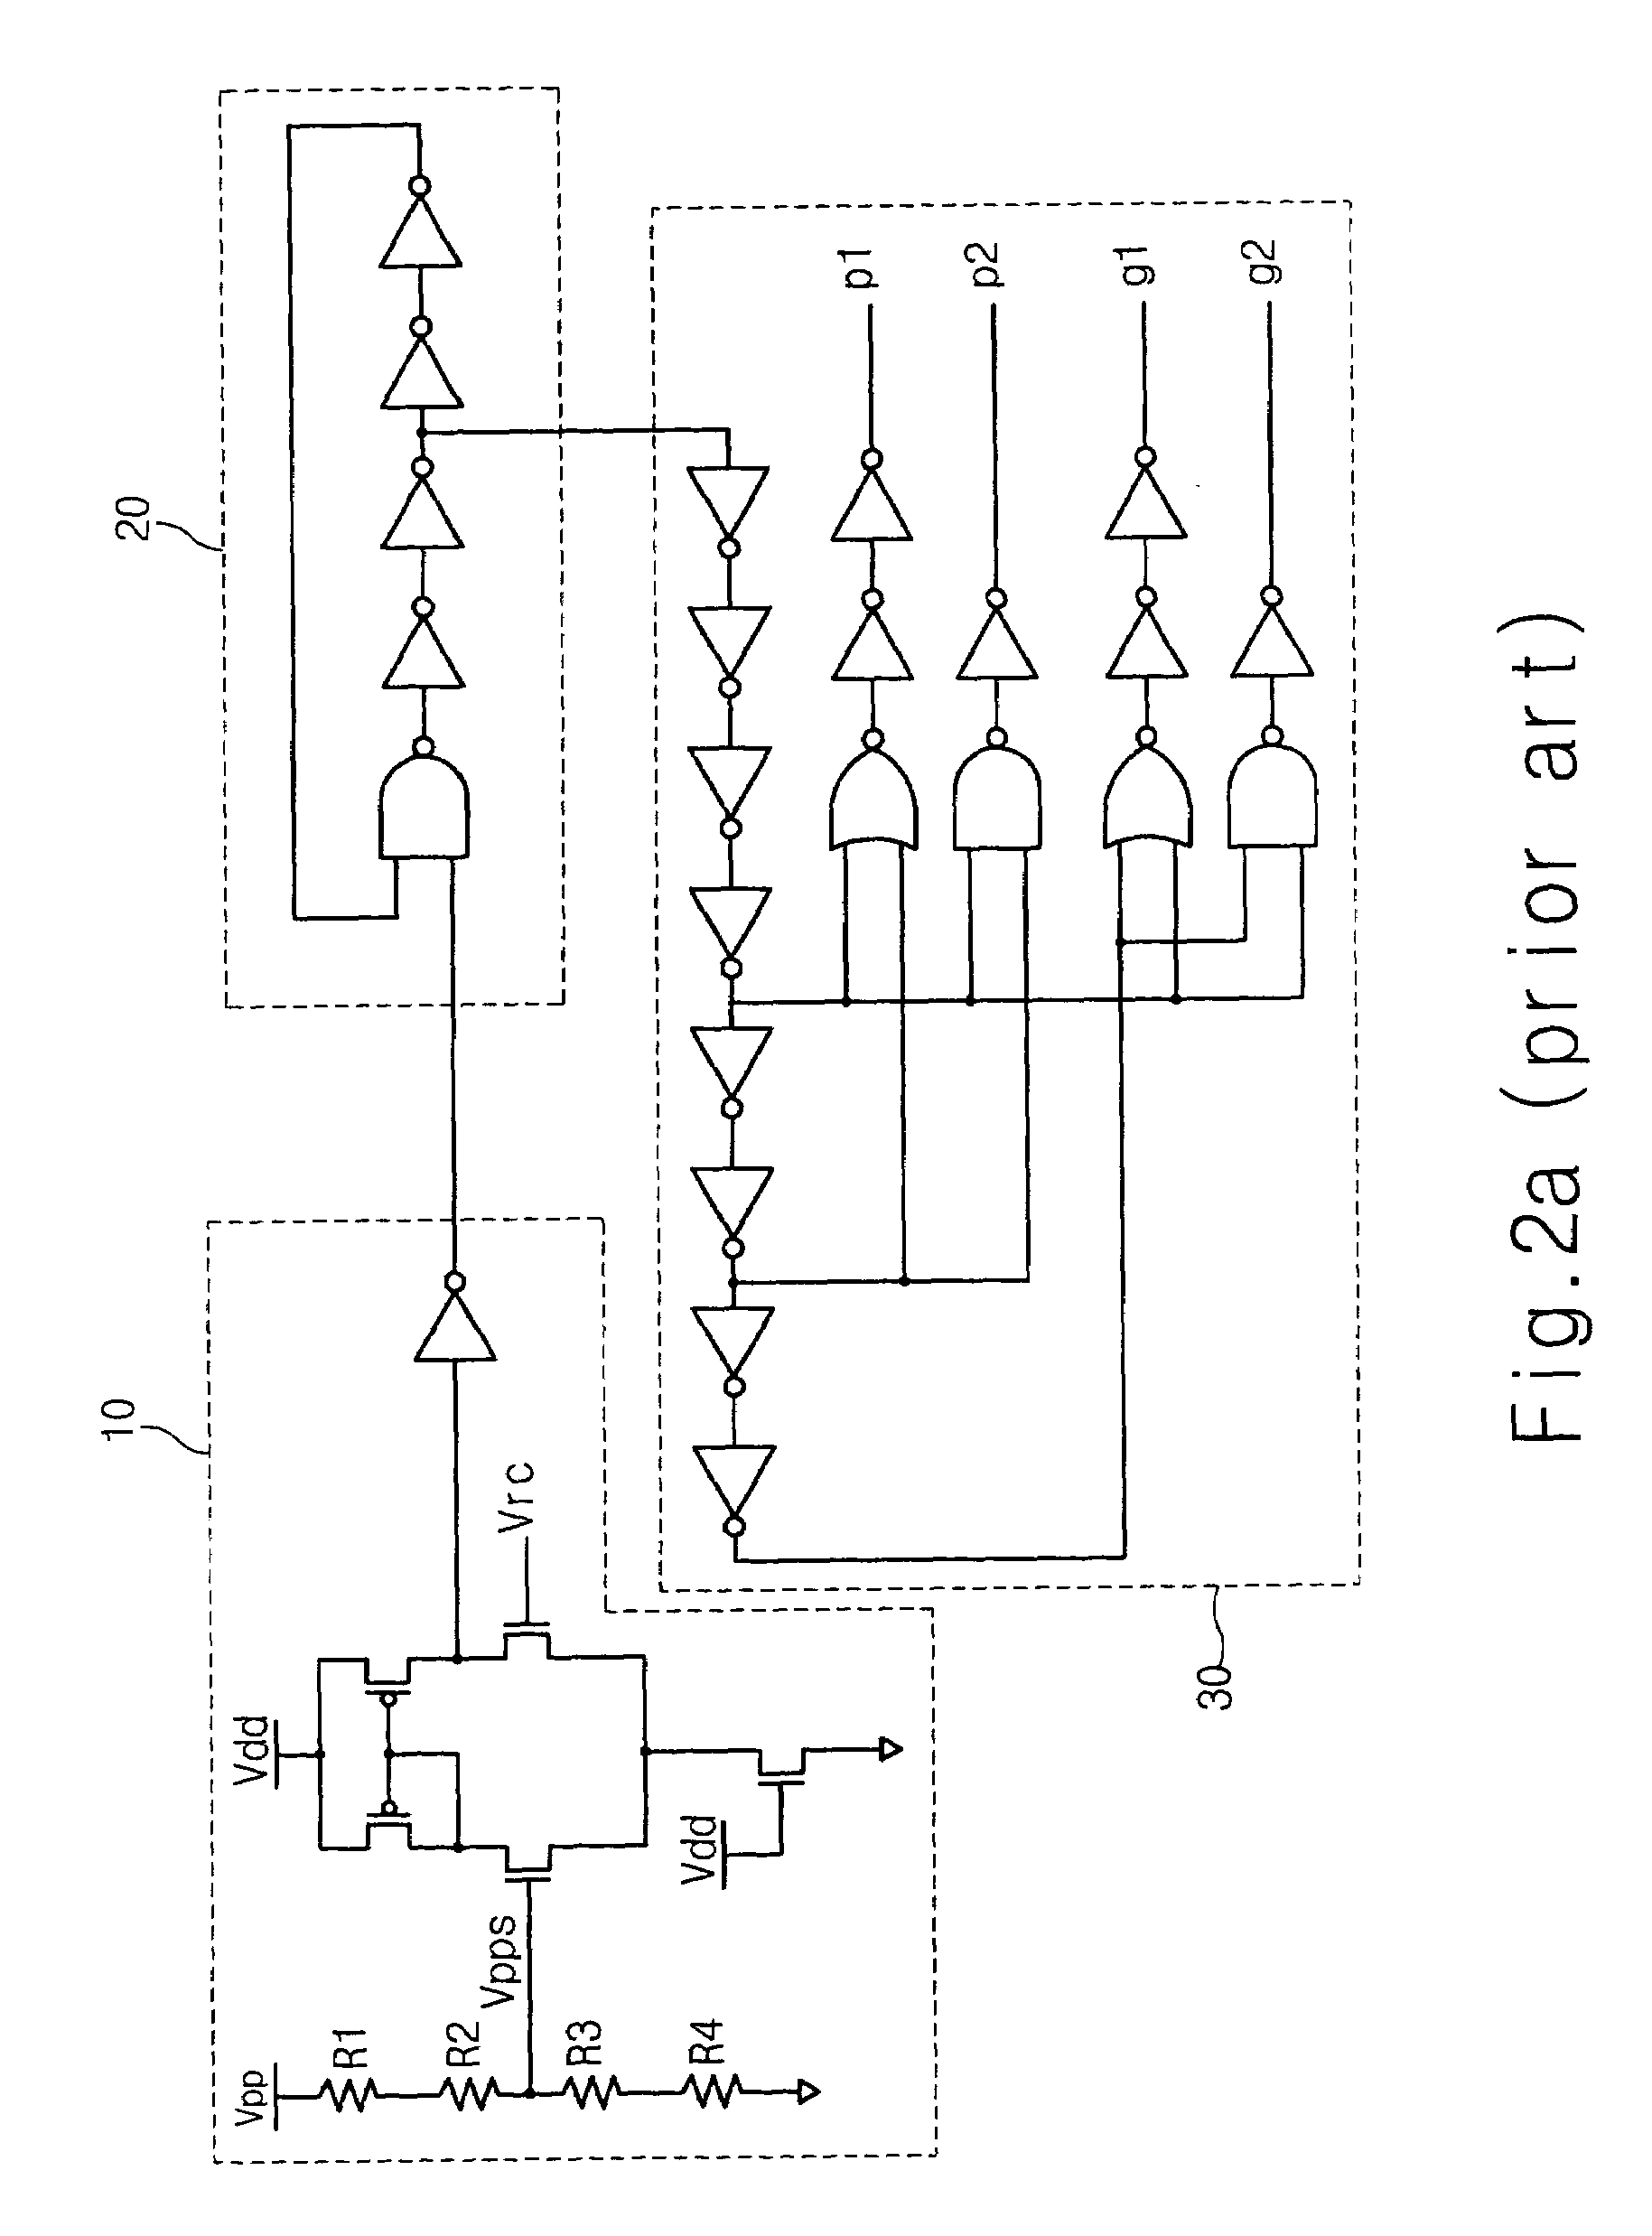 Voltage generator with reduced noise